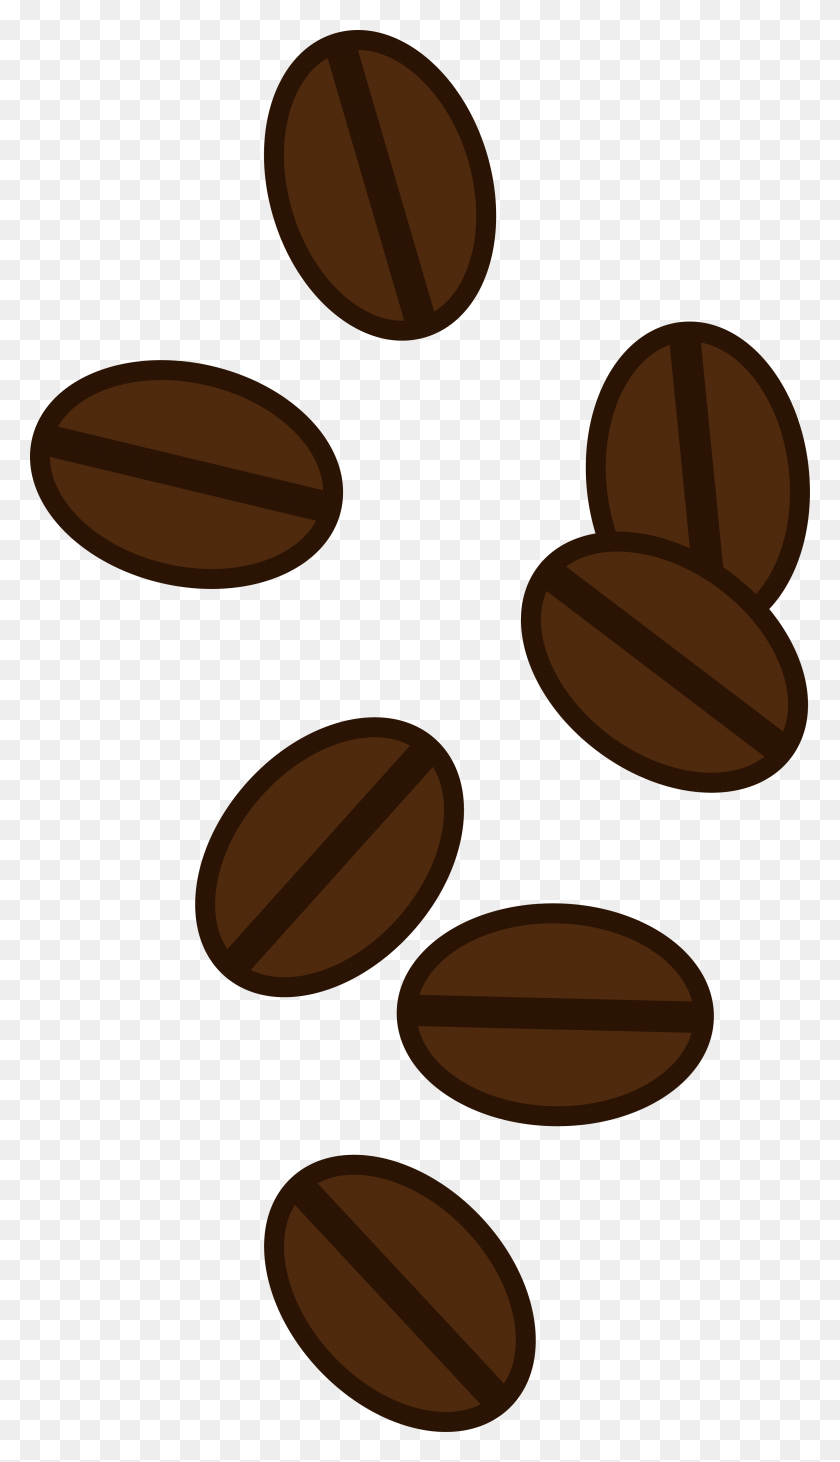 3252x5846 Coffee Beans Clipart Apple Seed - Frappuccino Clipart